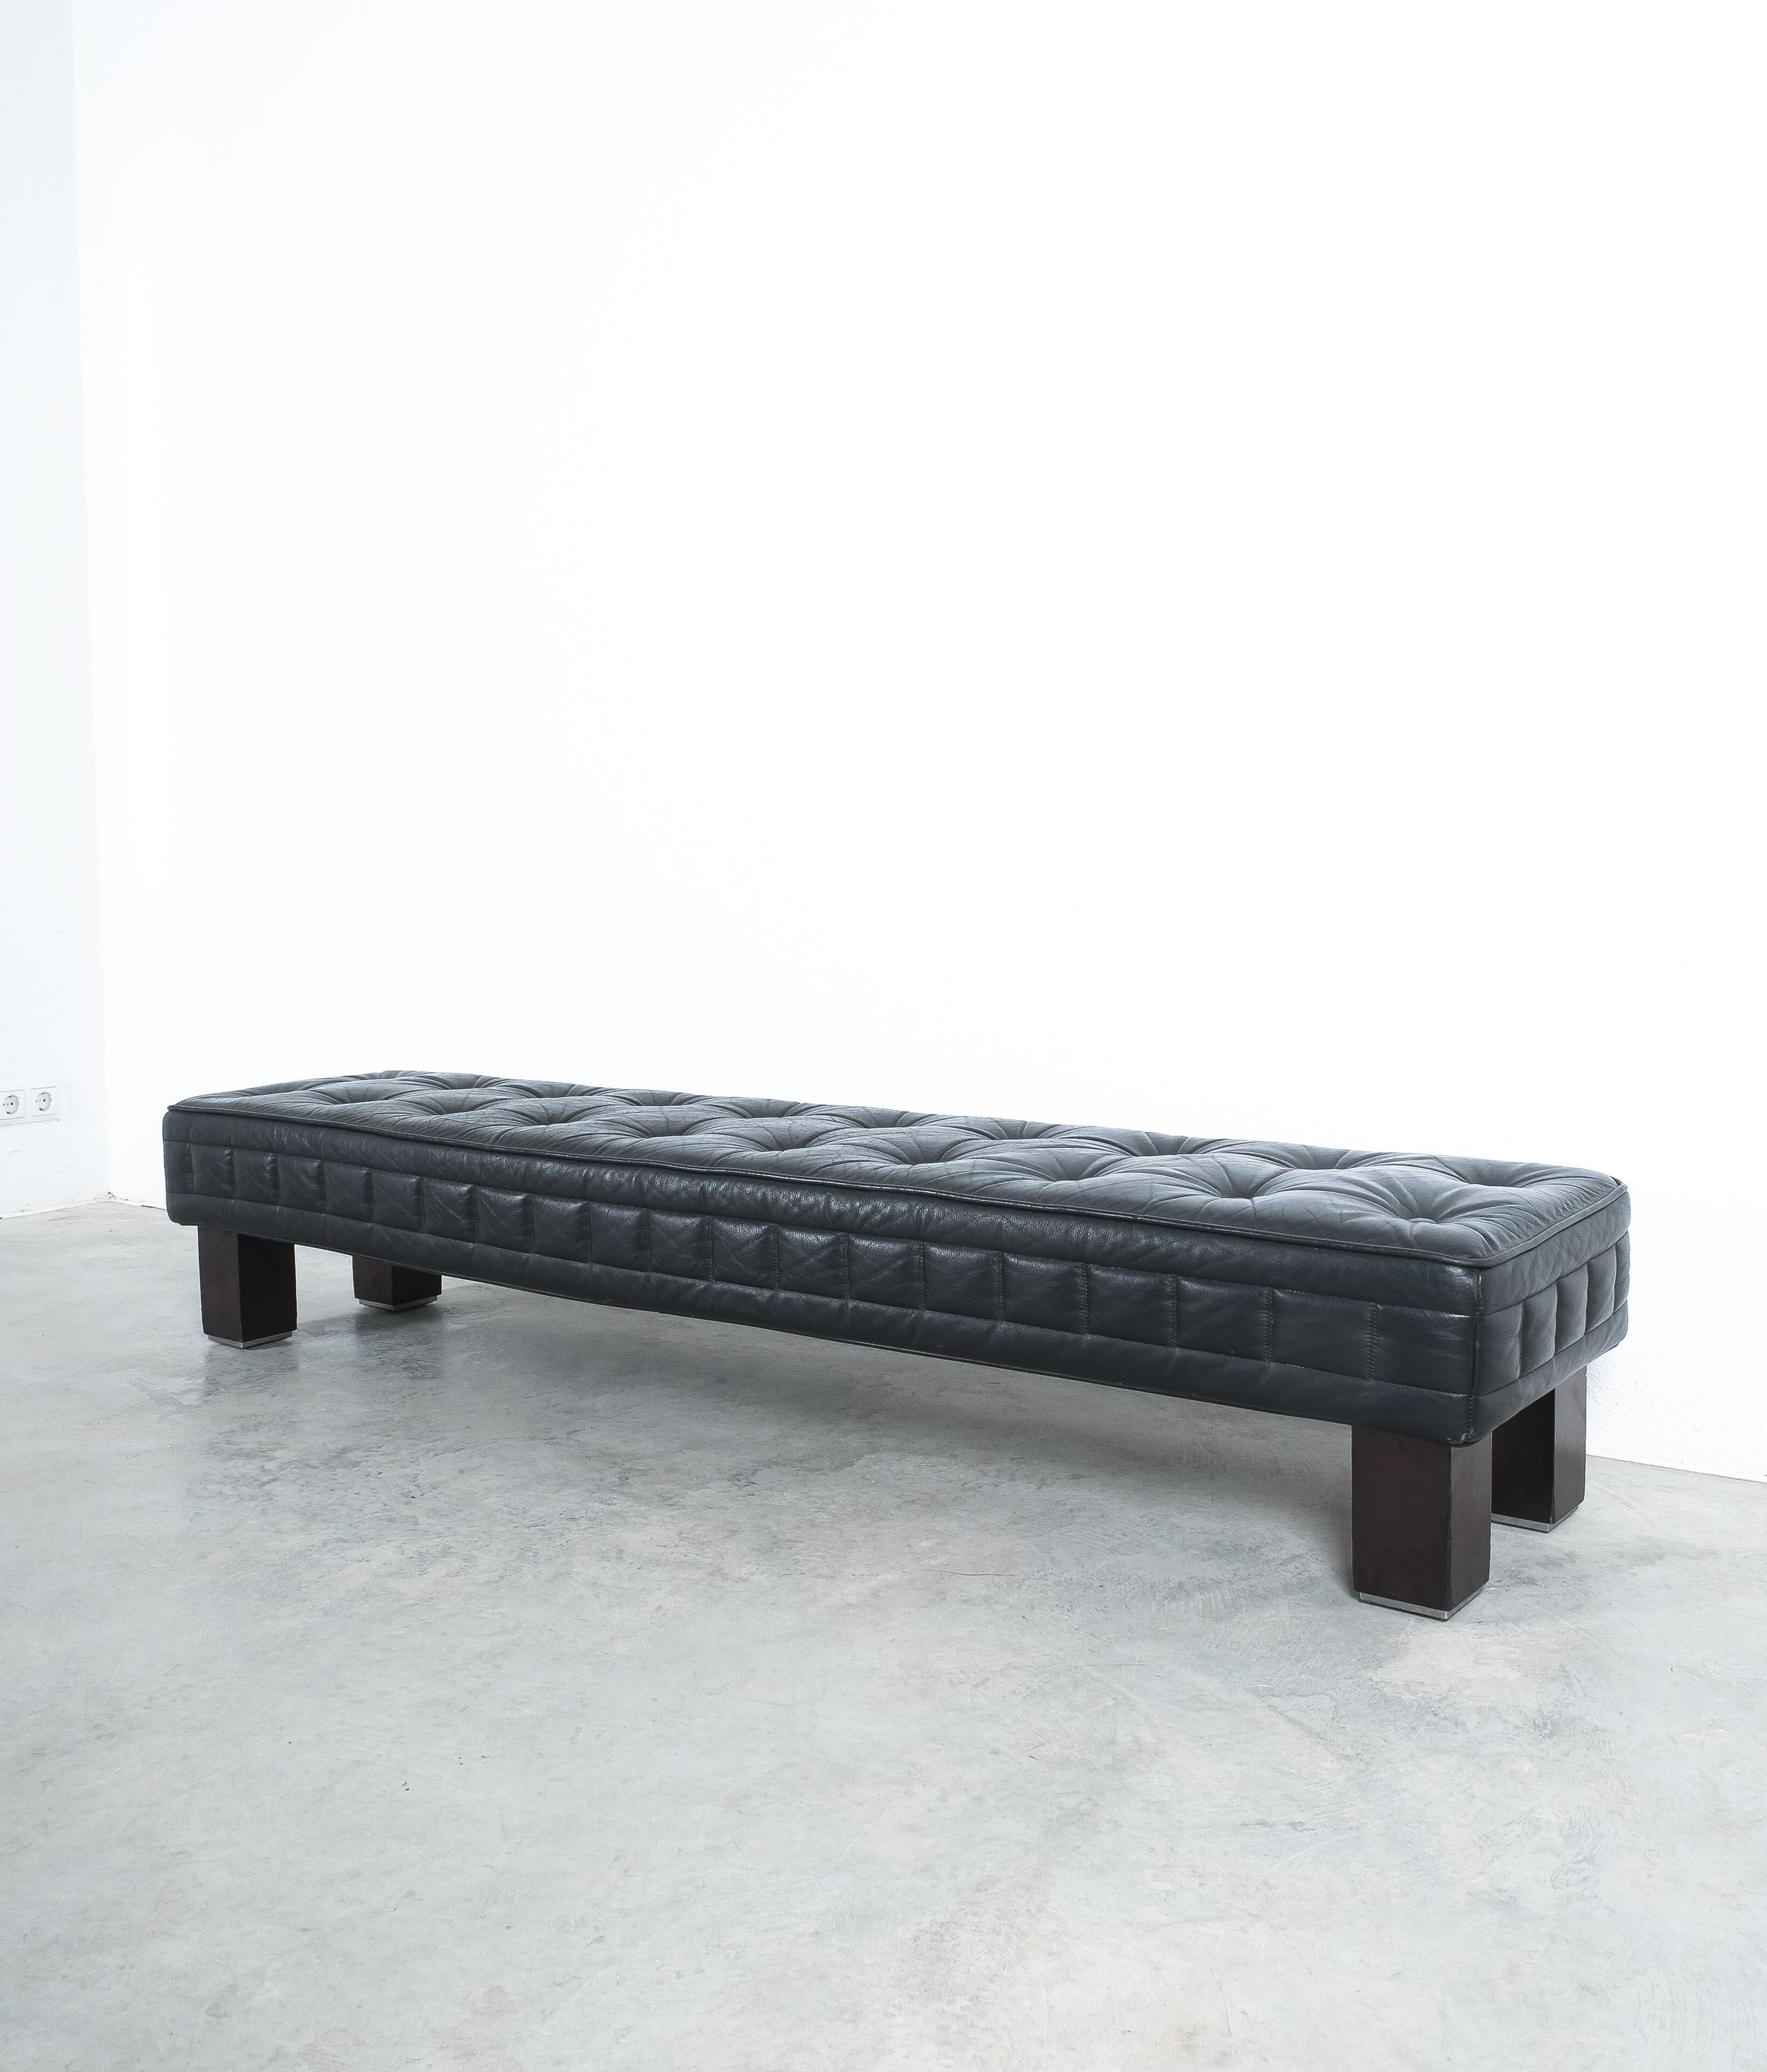 Matteo Thun Tufted Black Leather Banquettes (2 pieces) Bench Materassi, Wittmann For Sale 1